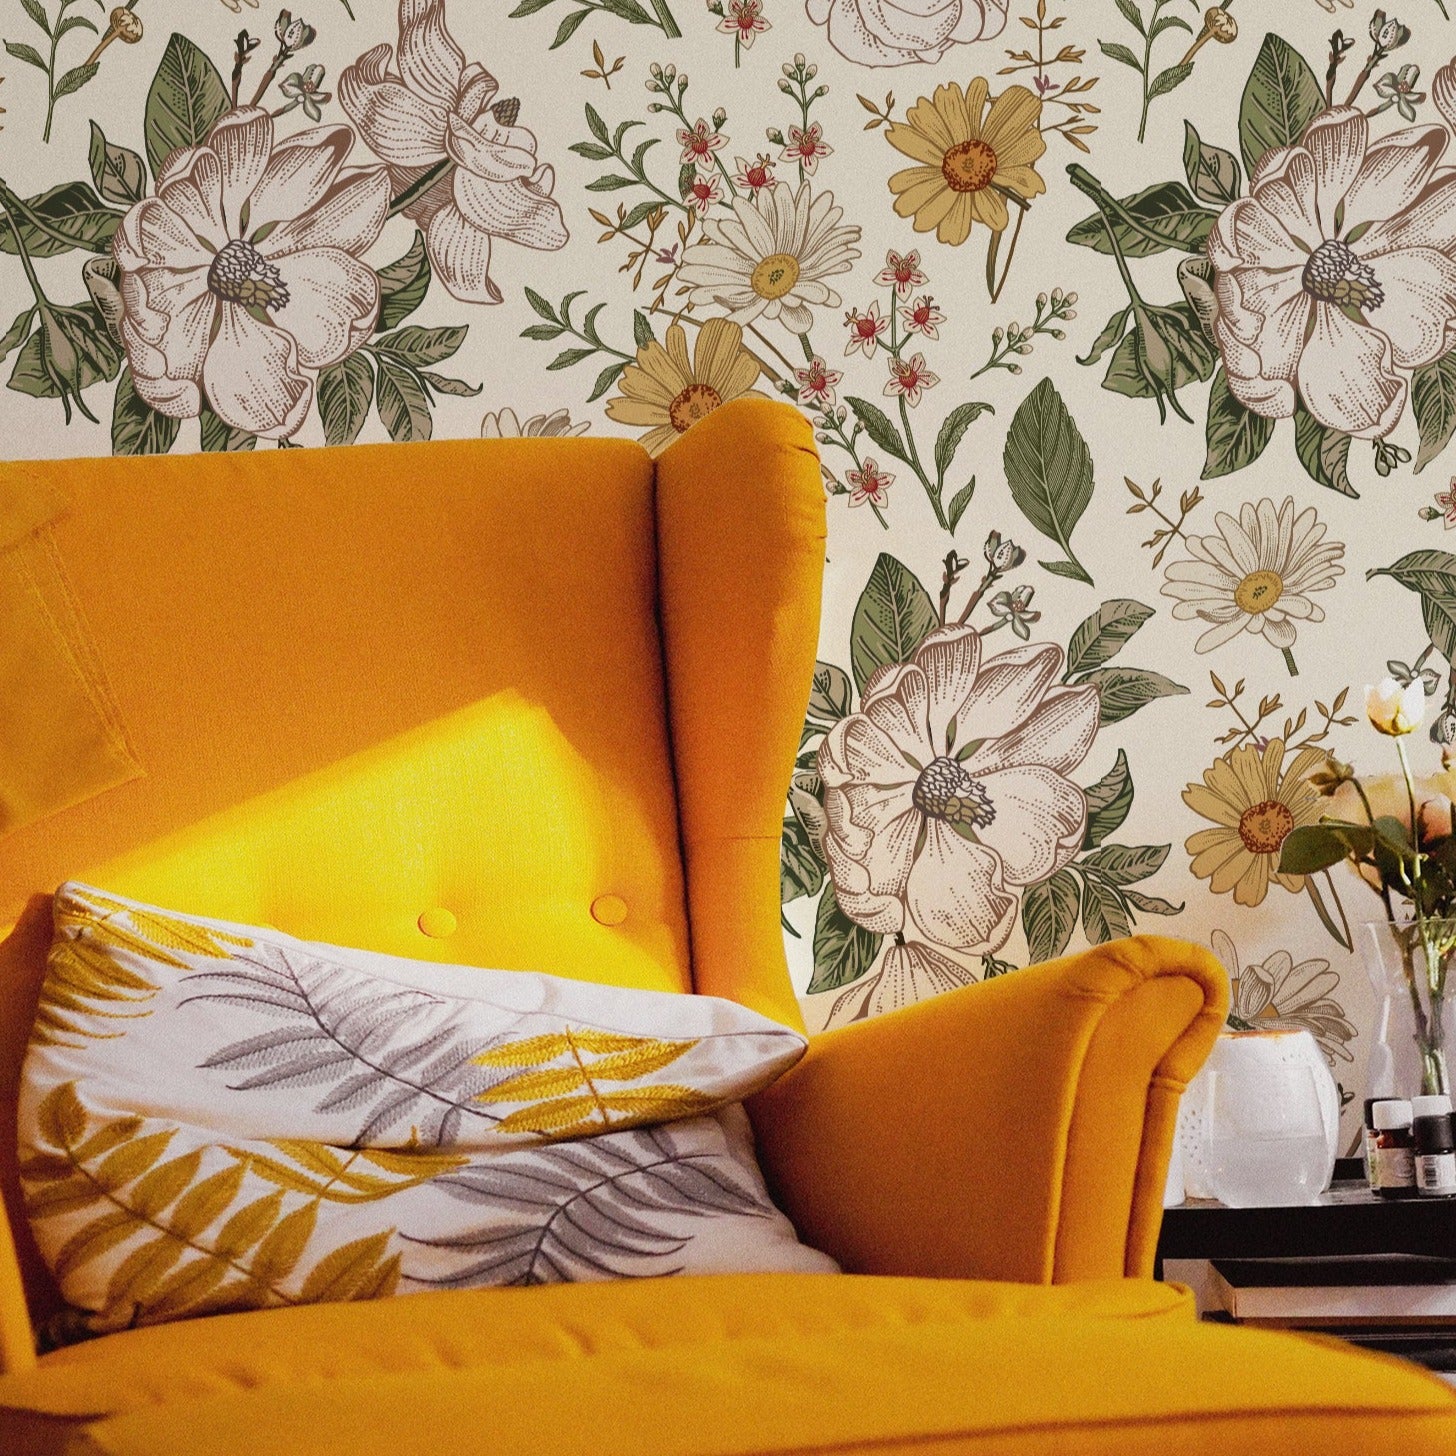 A cozy reading corner featuring a bold yellow armchair against the Floral Wallpaper - Sunny, which complements the chair's vibrant color with its cheerful and sunny botanical pattern, enhancing the warmth and inviting atmosphere of the room.